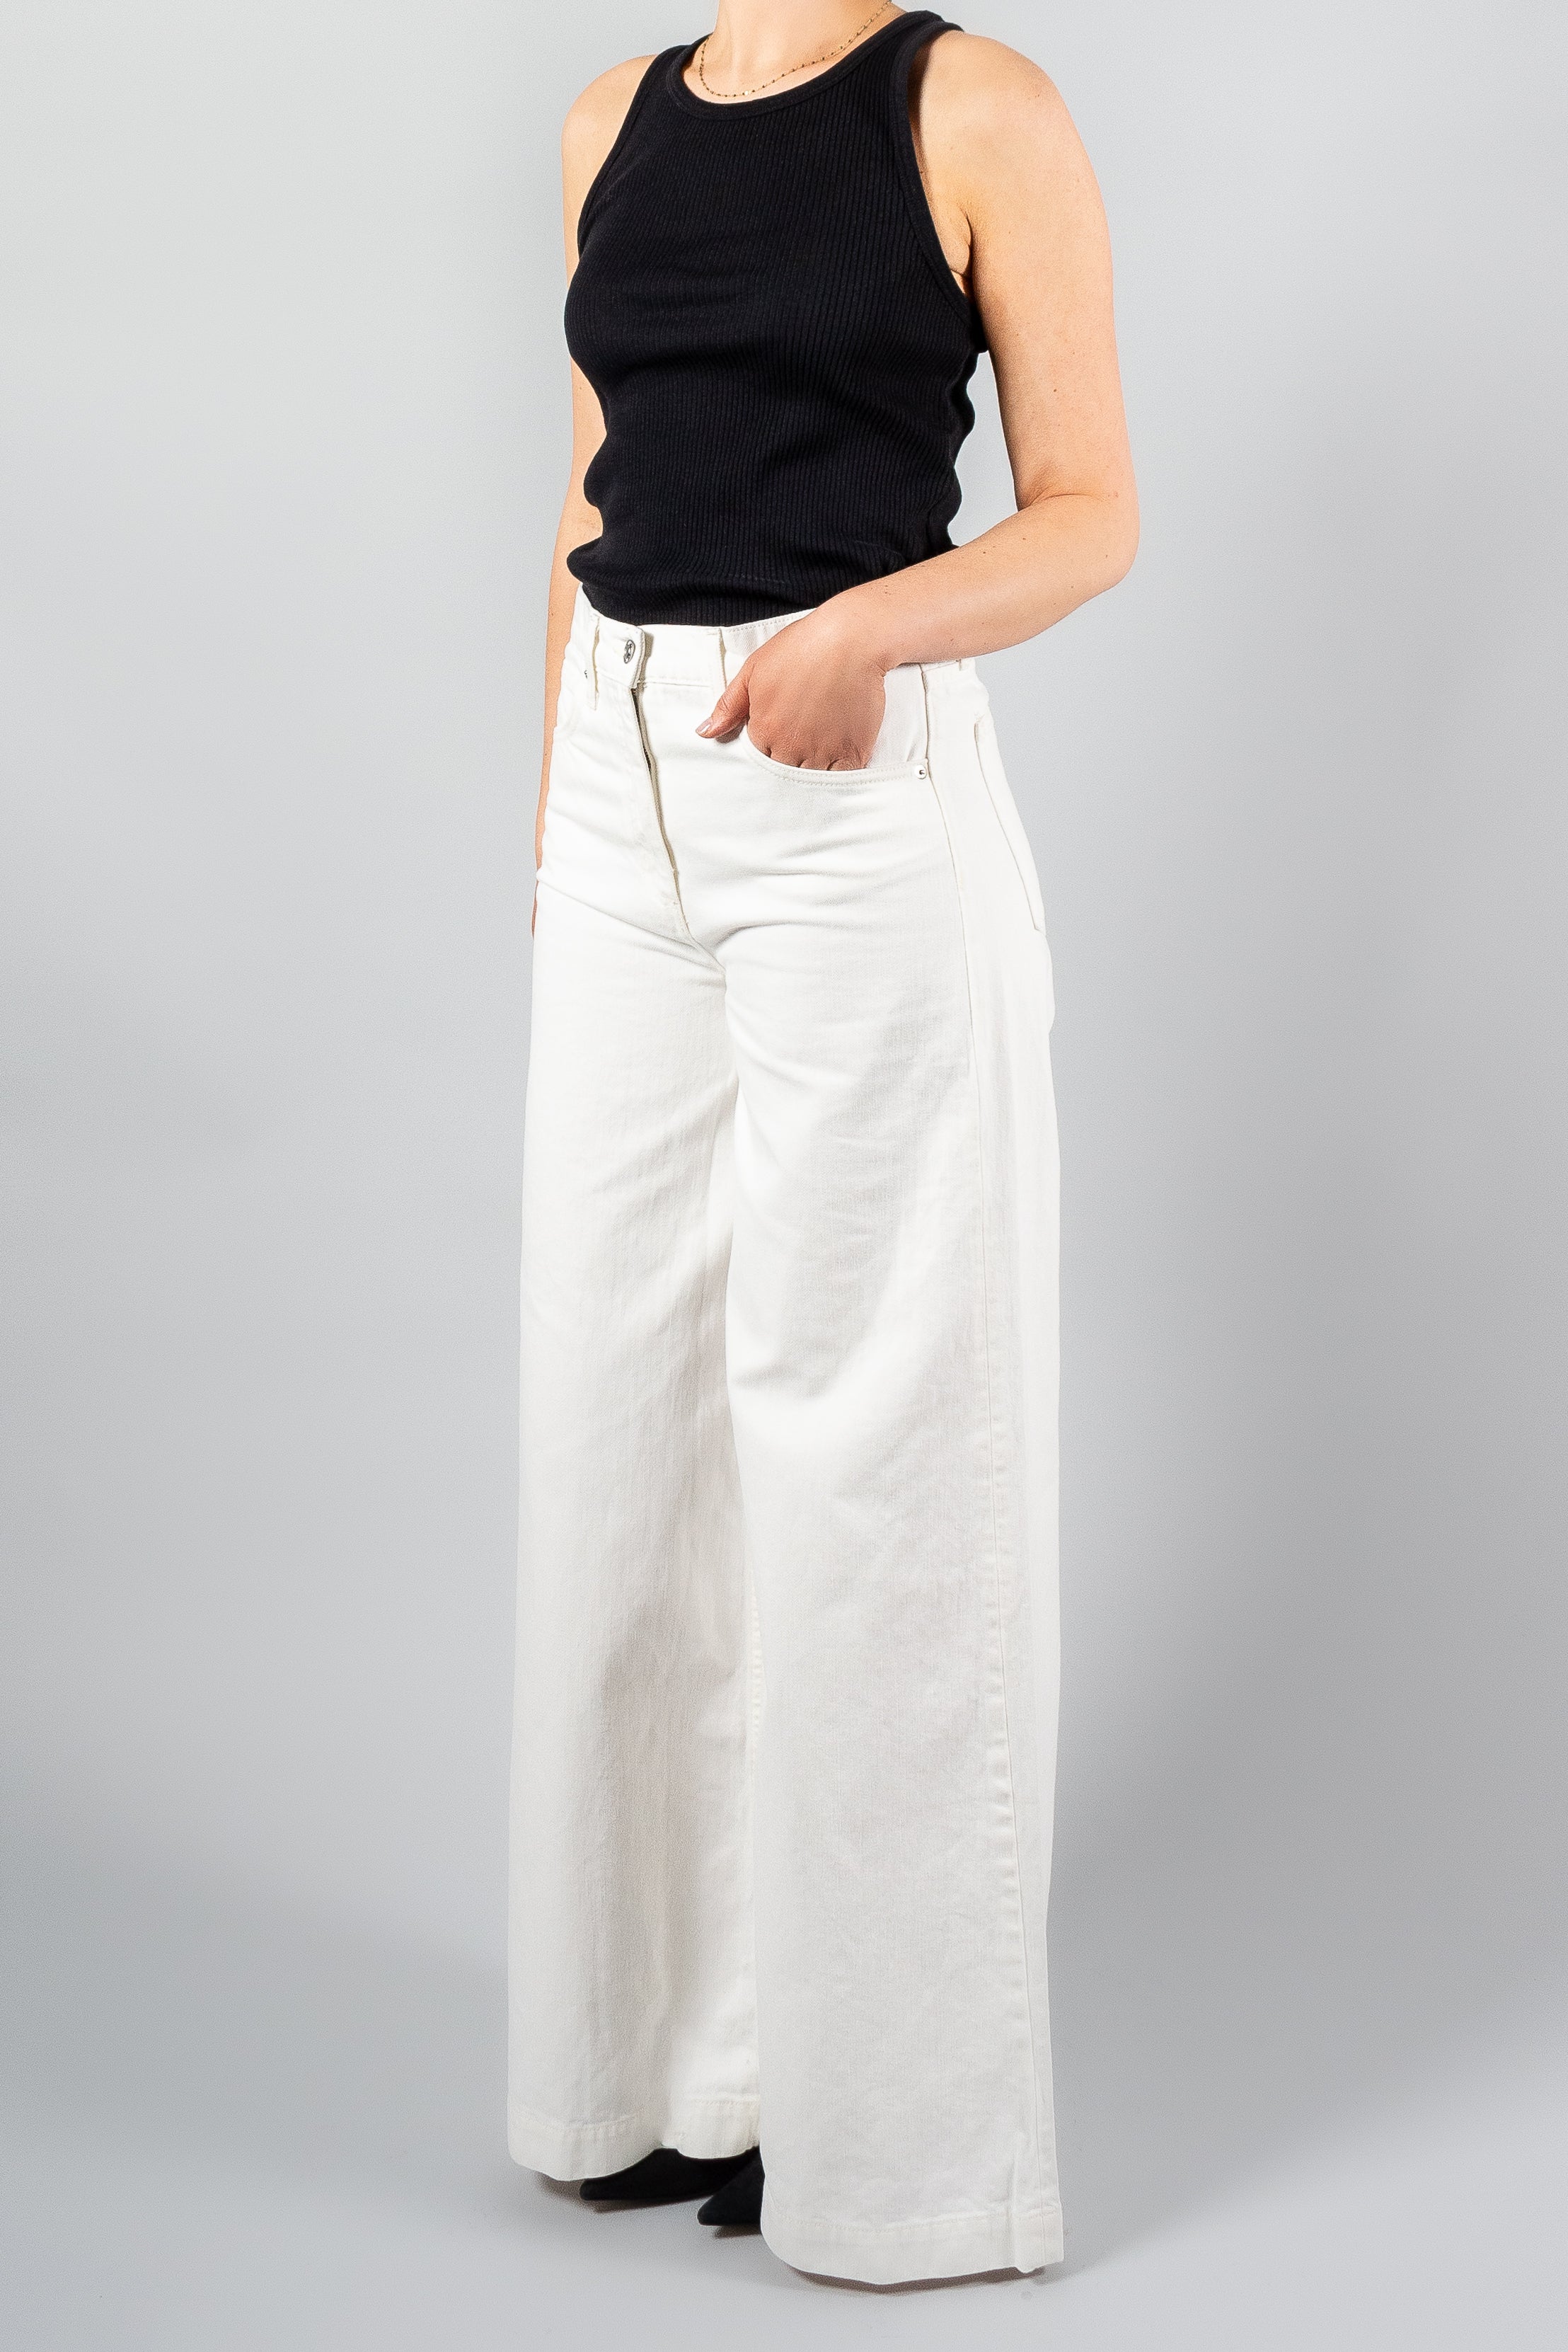 Nili Lotan Rolland Jean-Pants and Shorts-Misch-Boutique-Vancouver-Canada-misch.ca